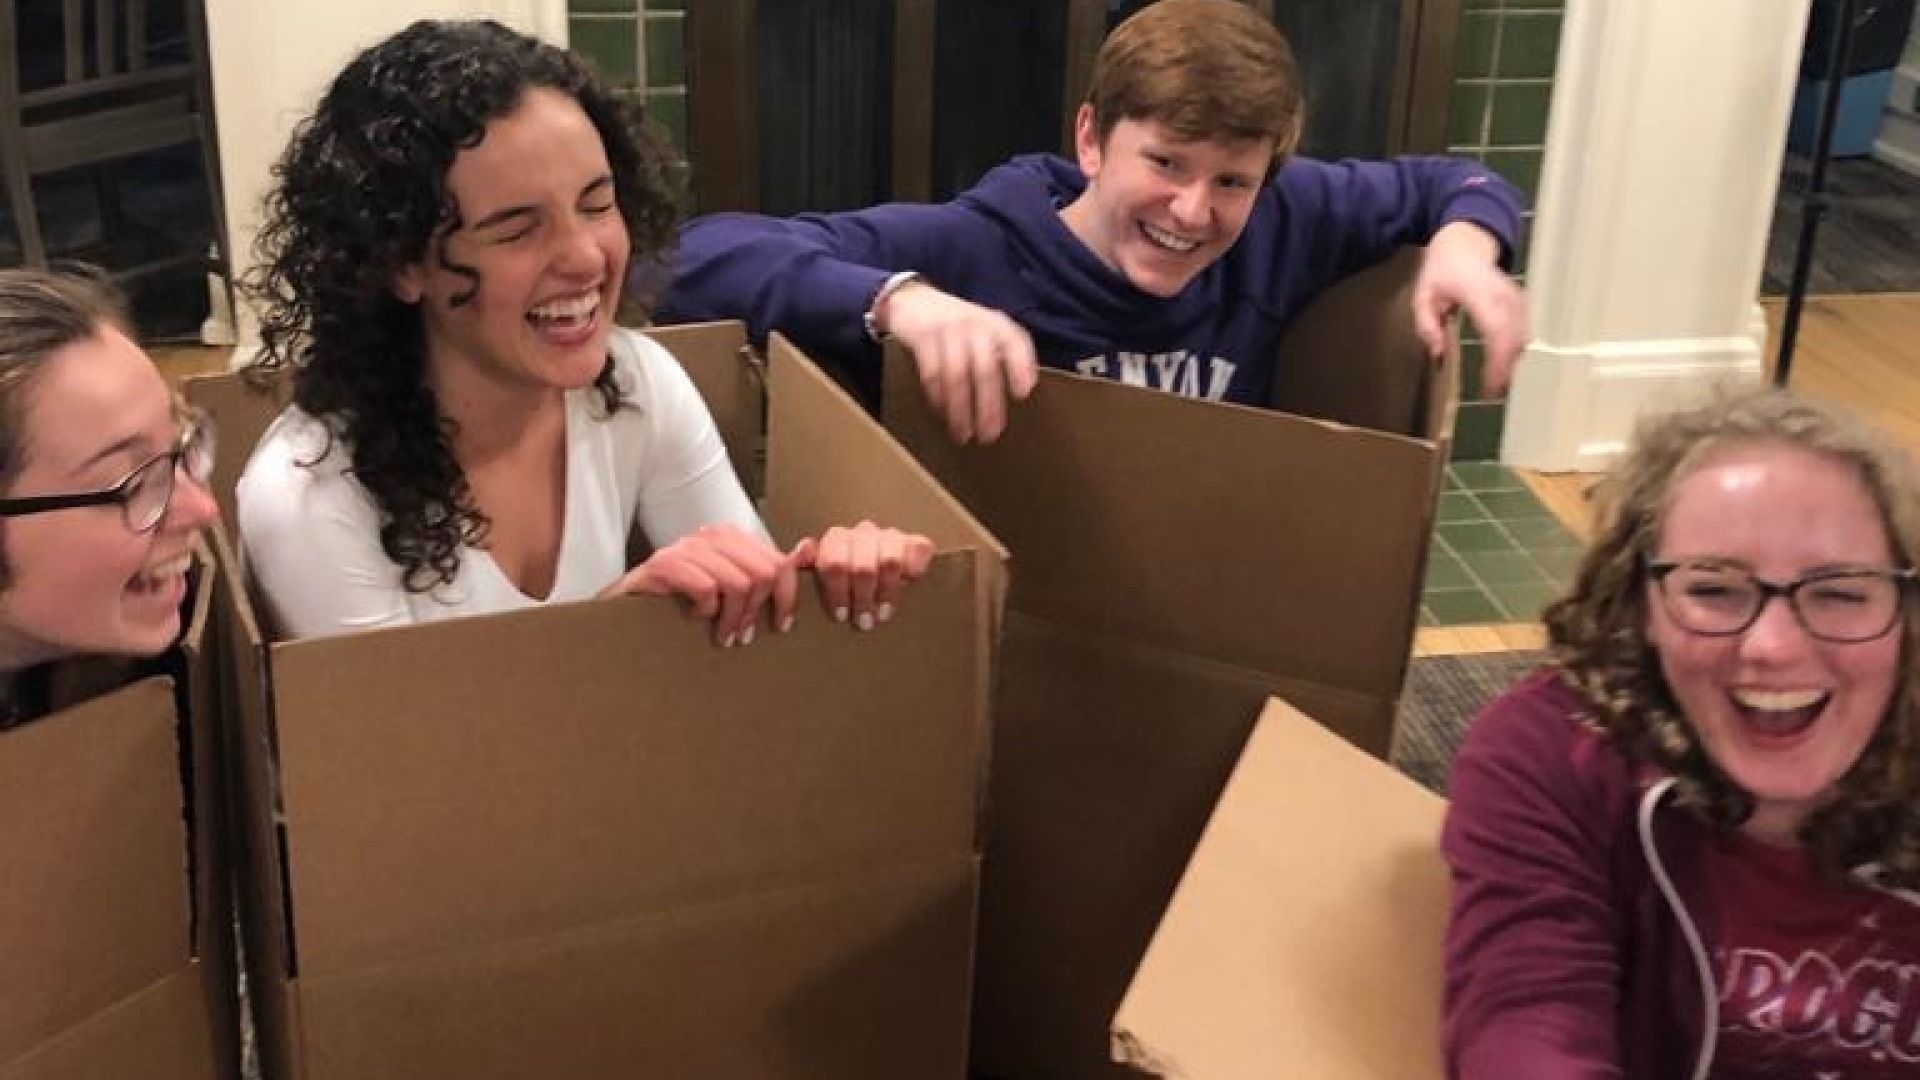 My friends and I are all inside boxes and trying to move, but laughing